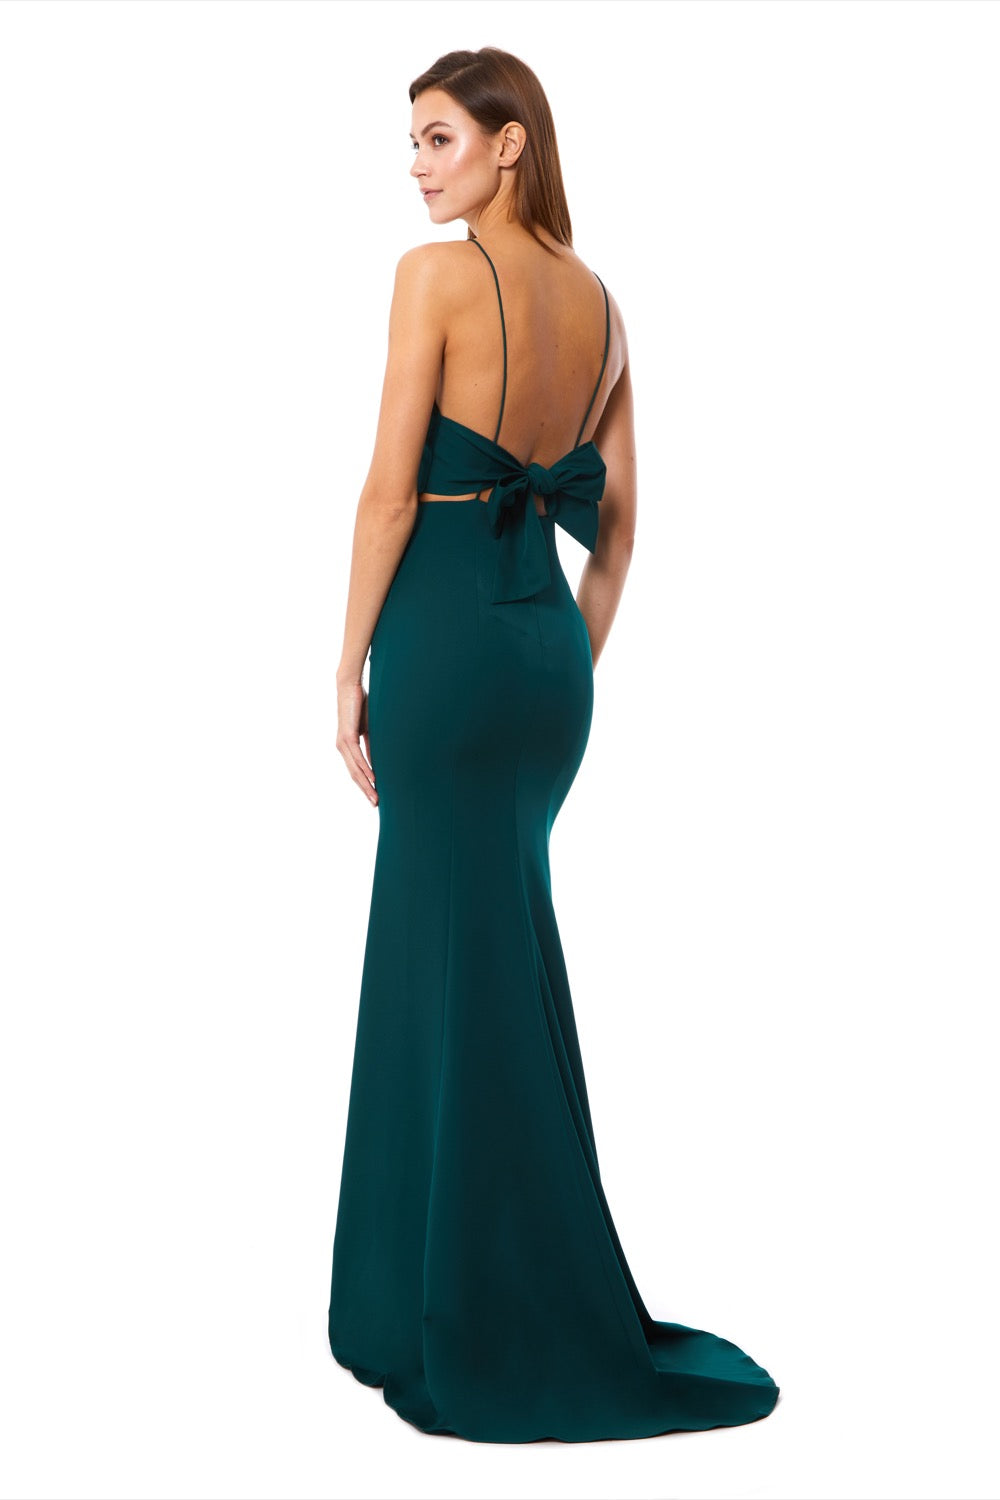 Jemima Square Neck Maxi Dress with Open Back, UK 8 / US 4 / EU 36 / Forest Green